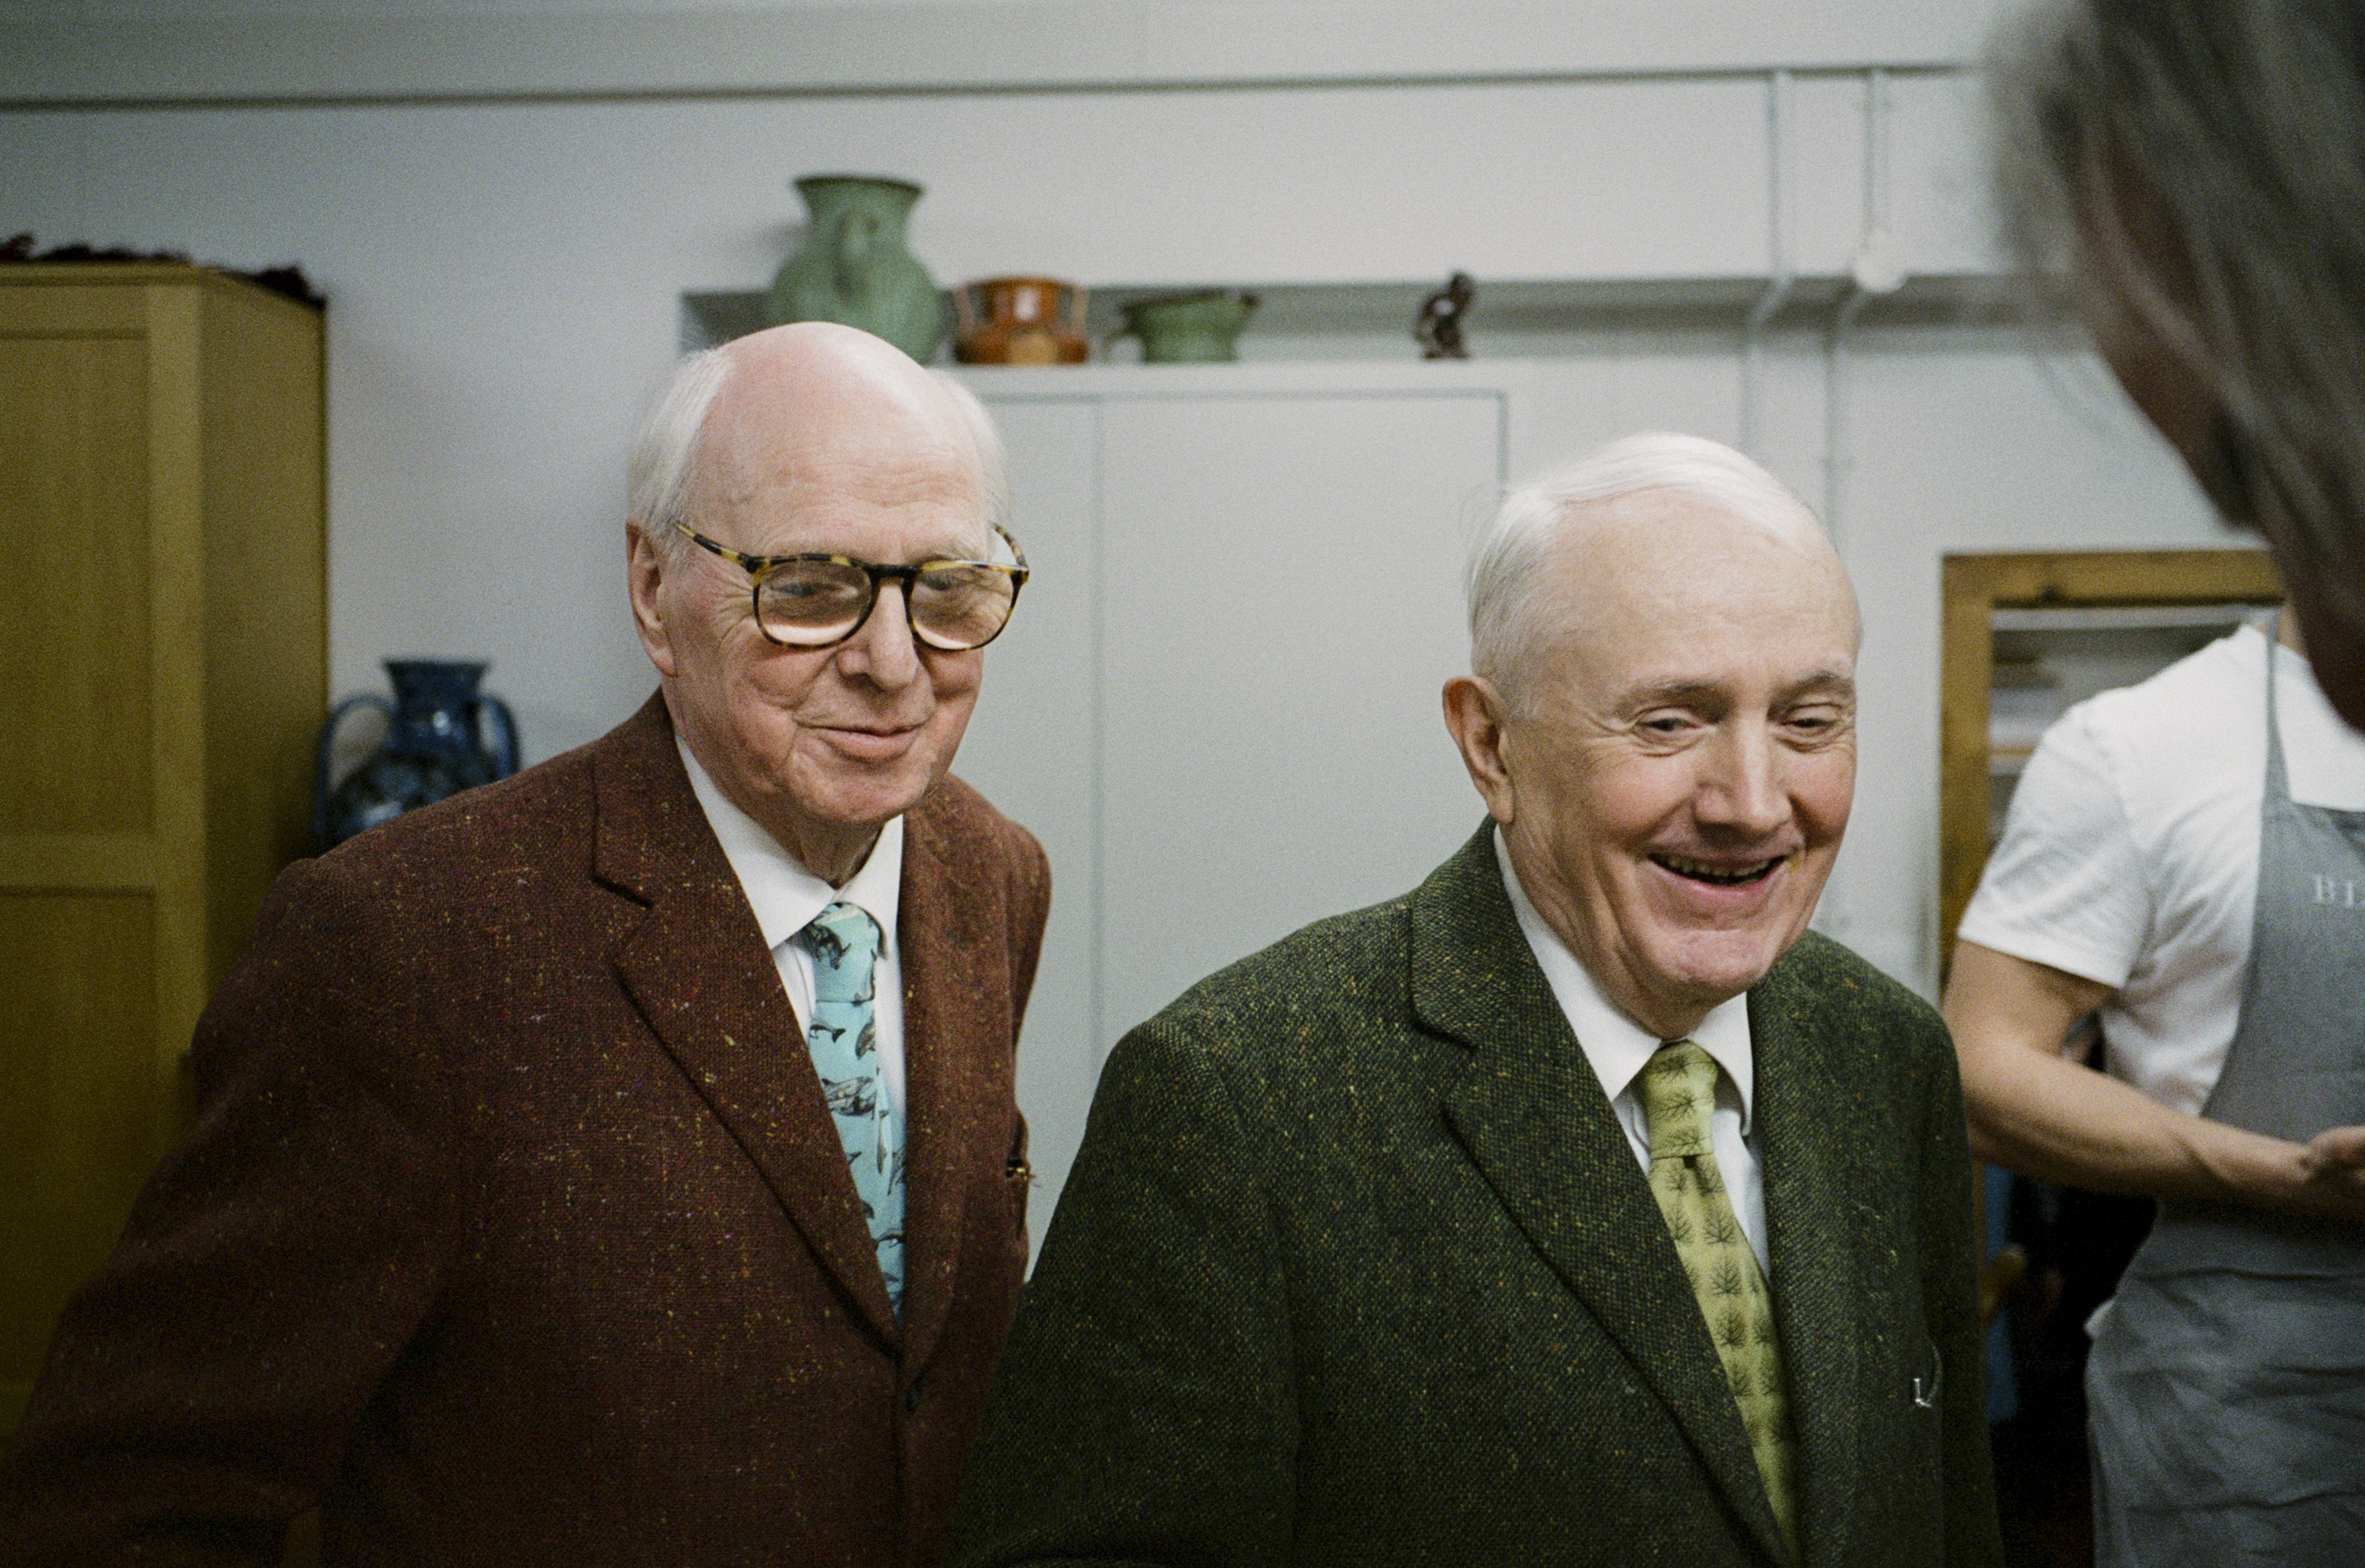 Gilbert & George host fundraising event for the Contemporary Art Society raising over £100,000 at their Private Studio and The Gilbert & George Centre